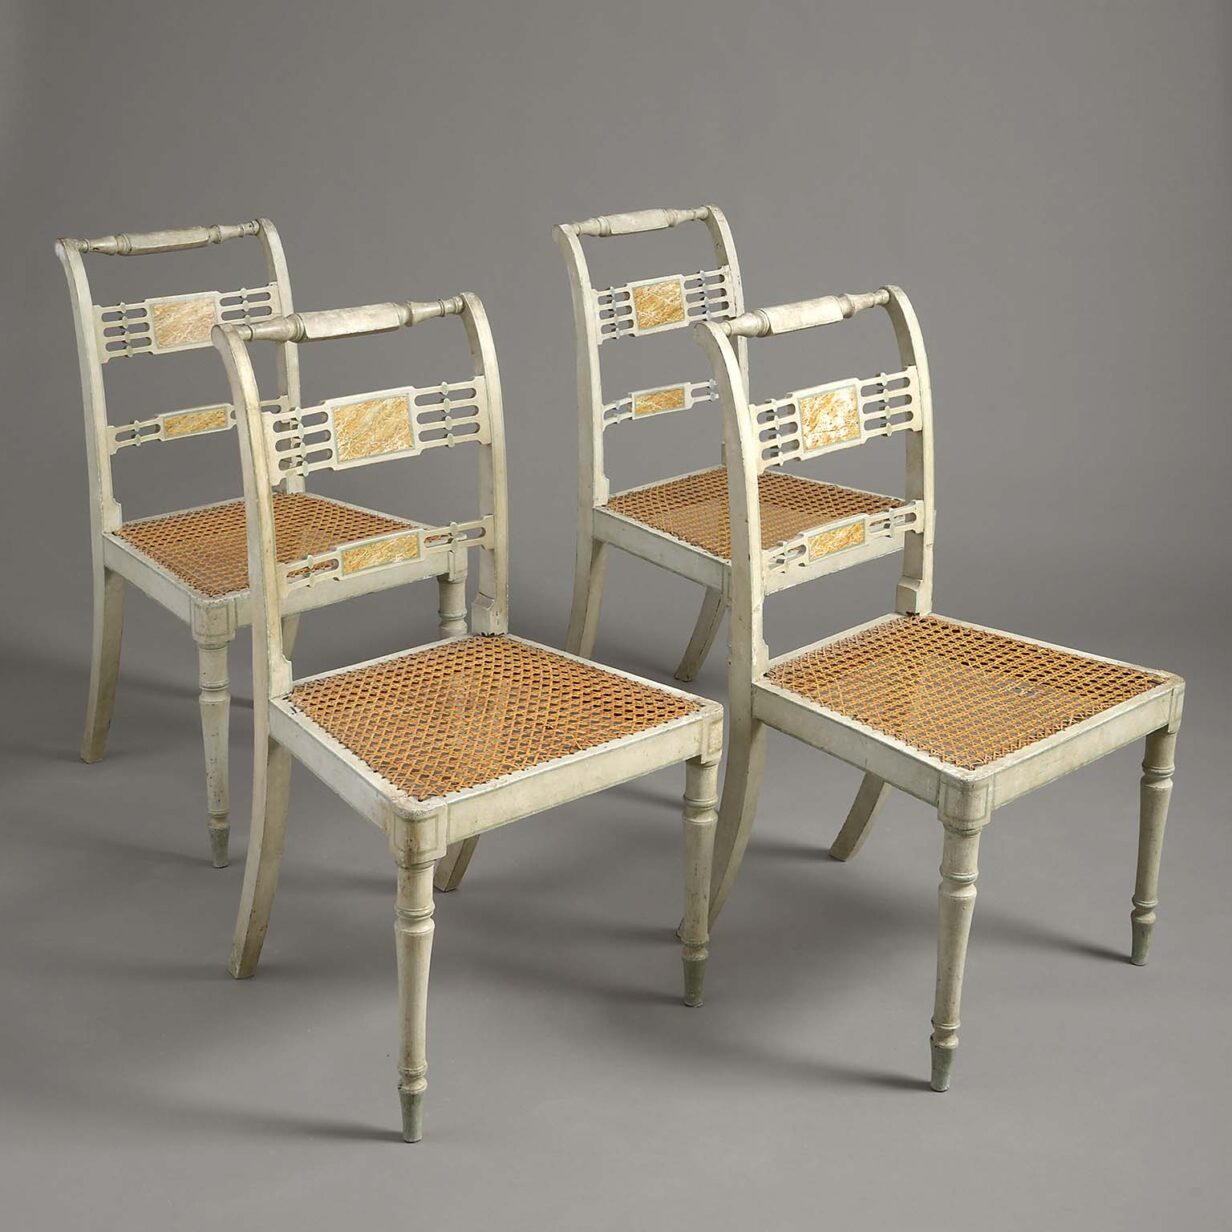 Four regency chairs